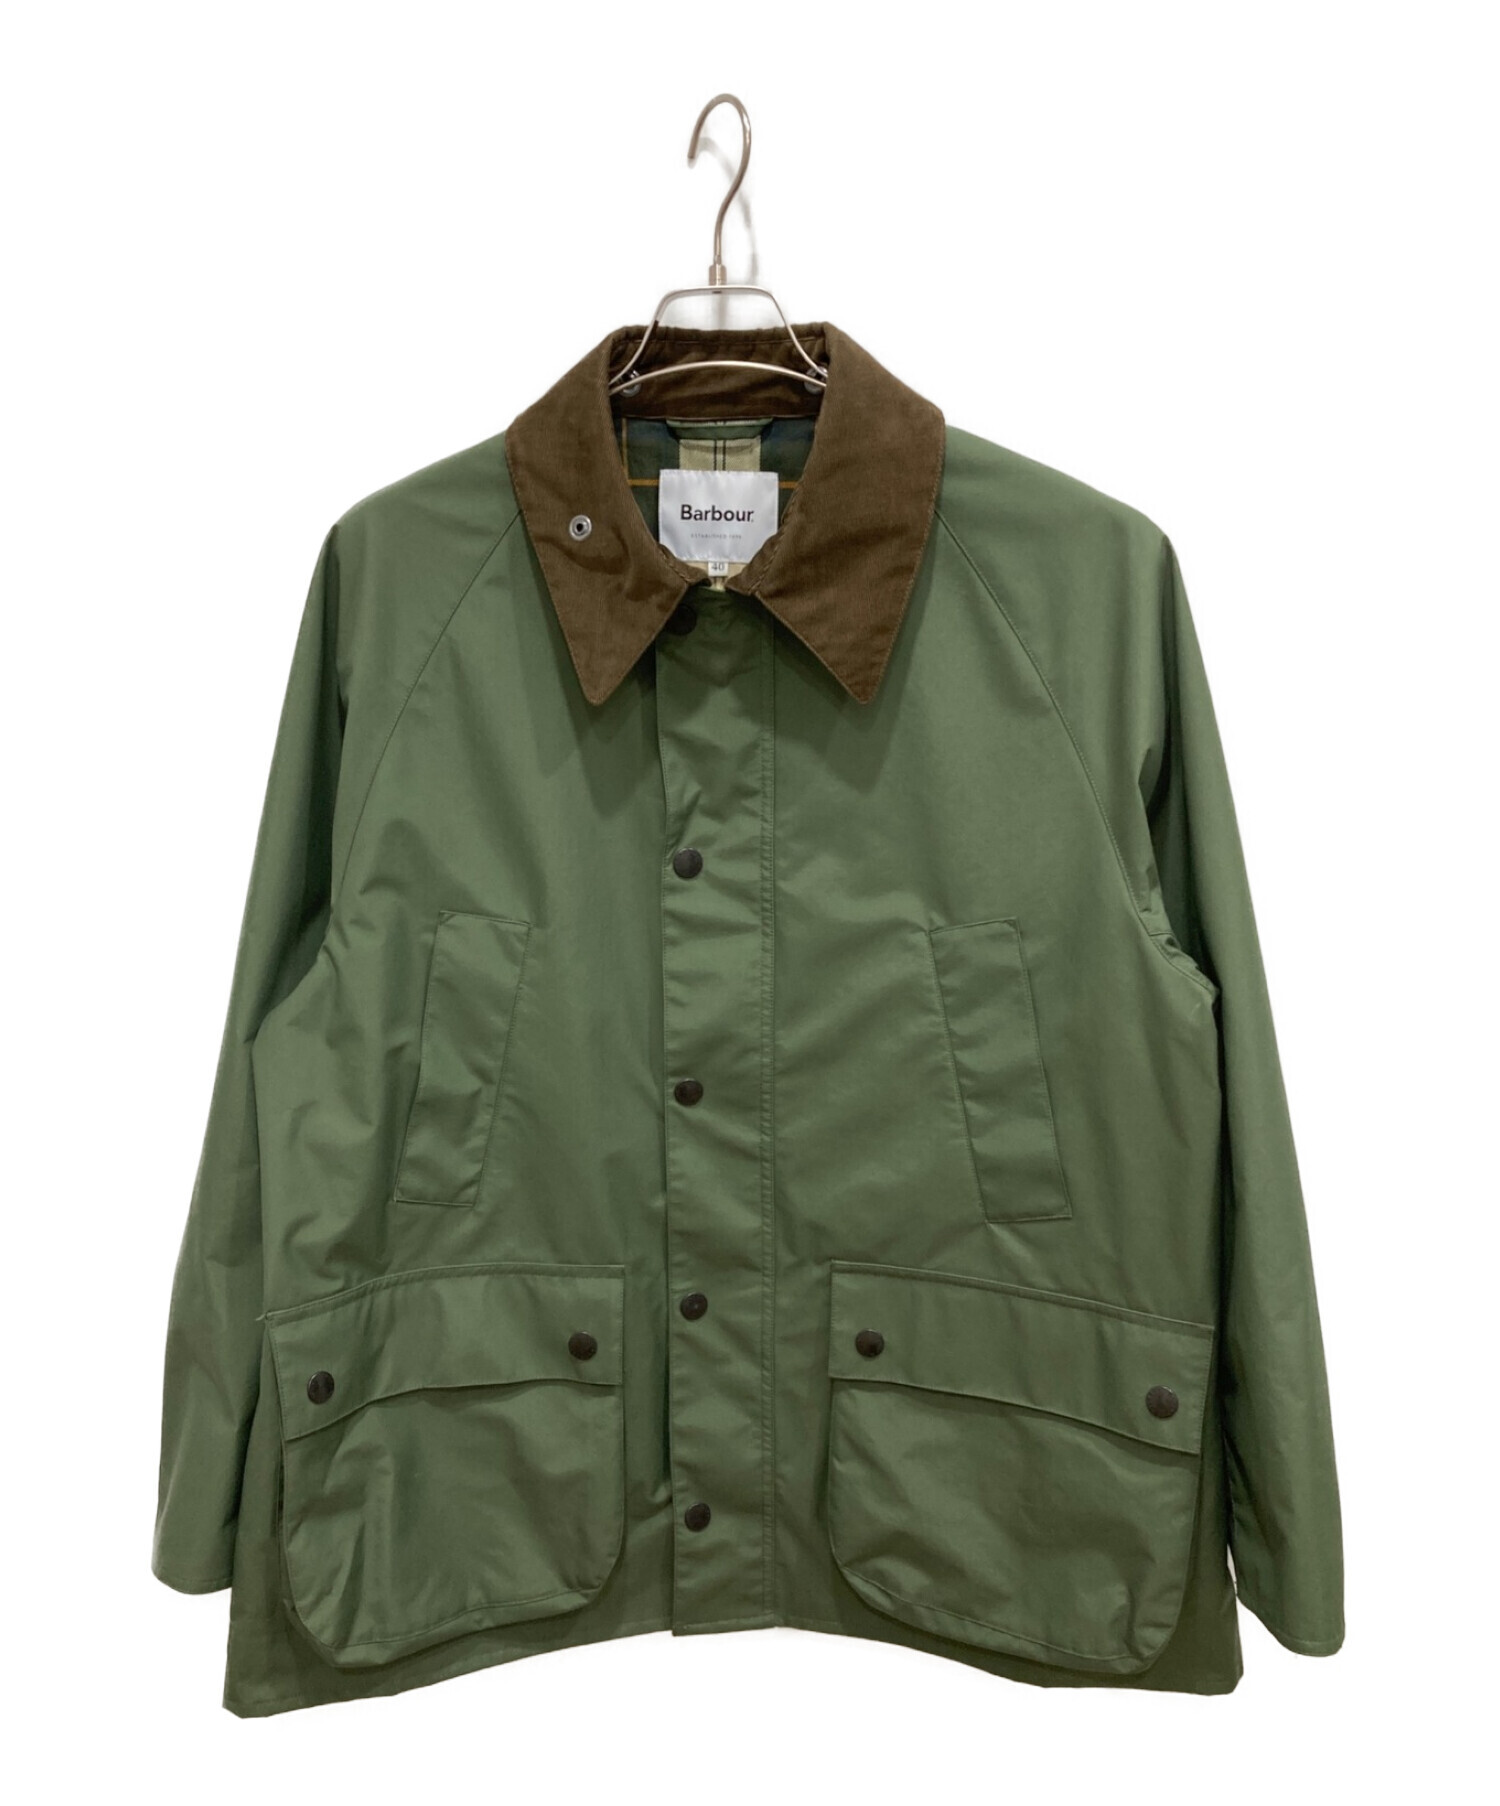 Barbour (バブアー) URBAN RESEARCH (アーバンリサーチ) BEDALE カーキ サイズ:40